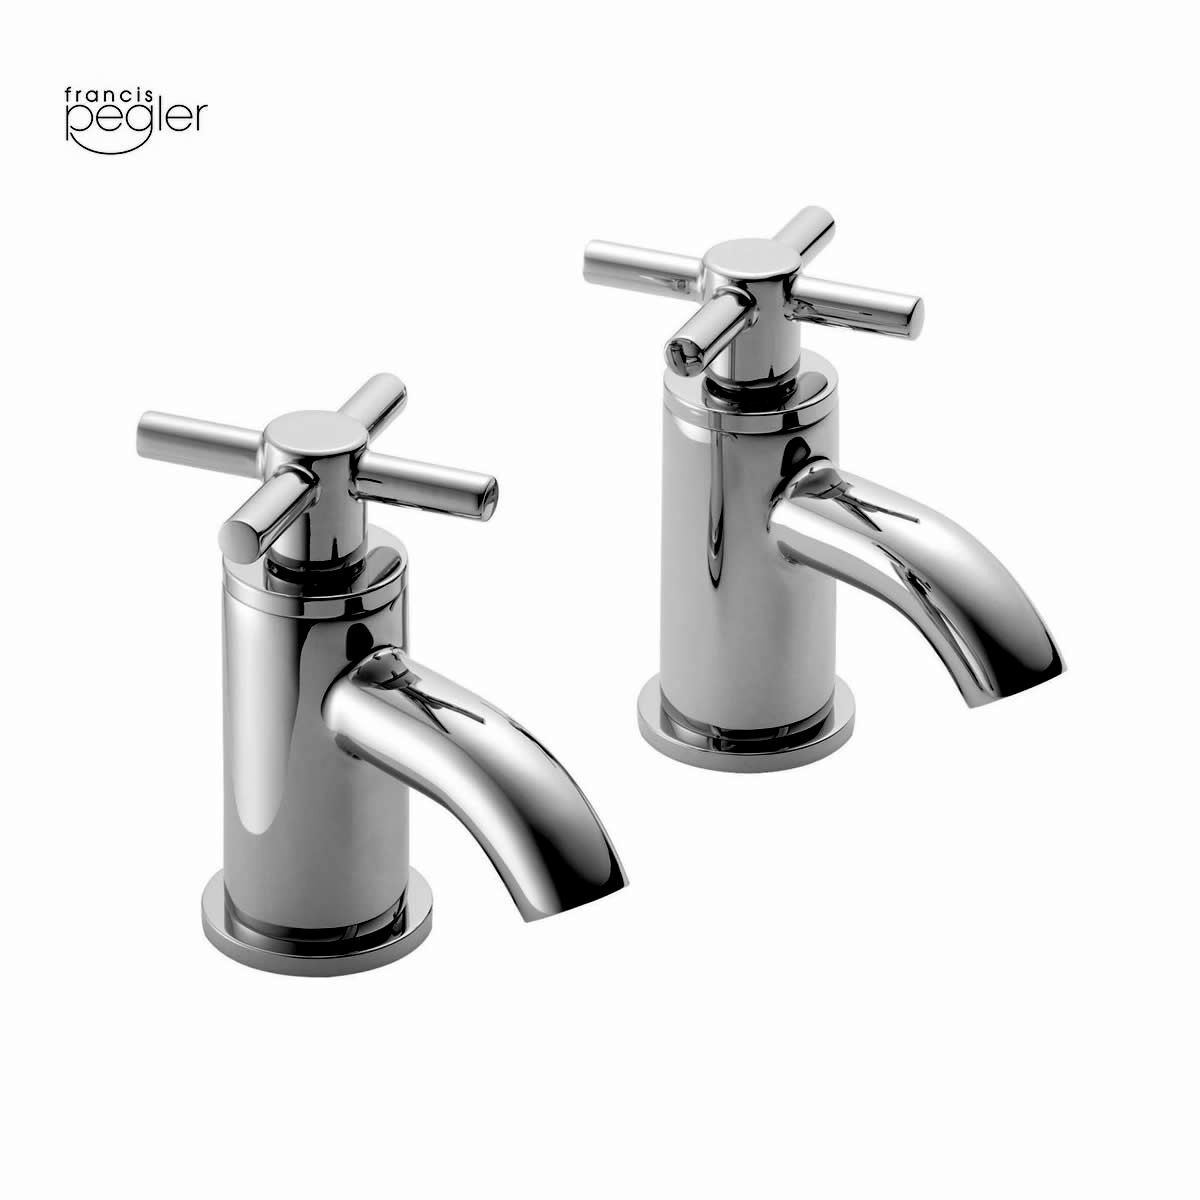 picture of a bath tap pair